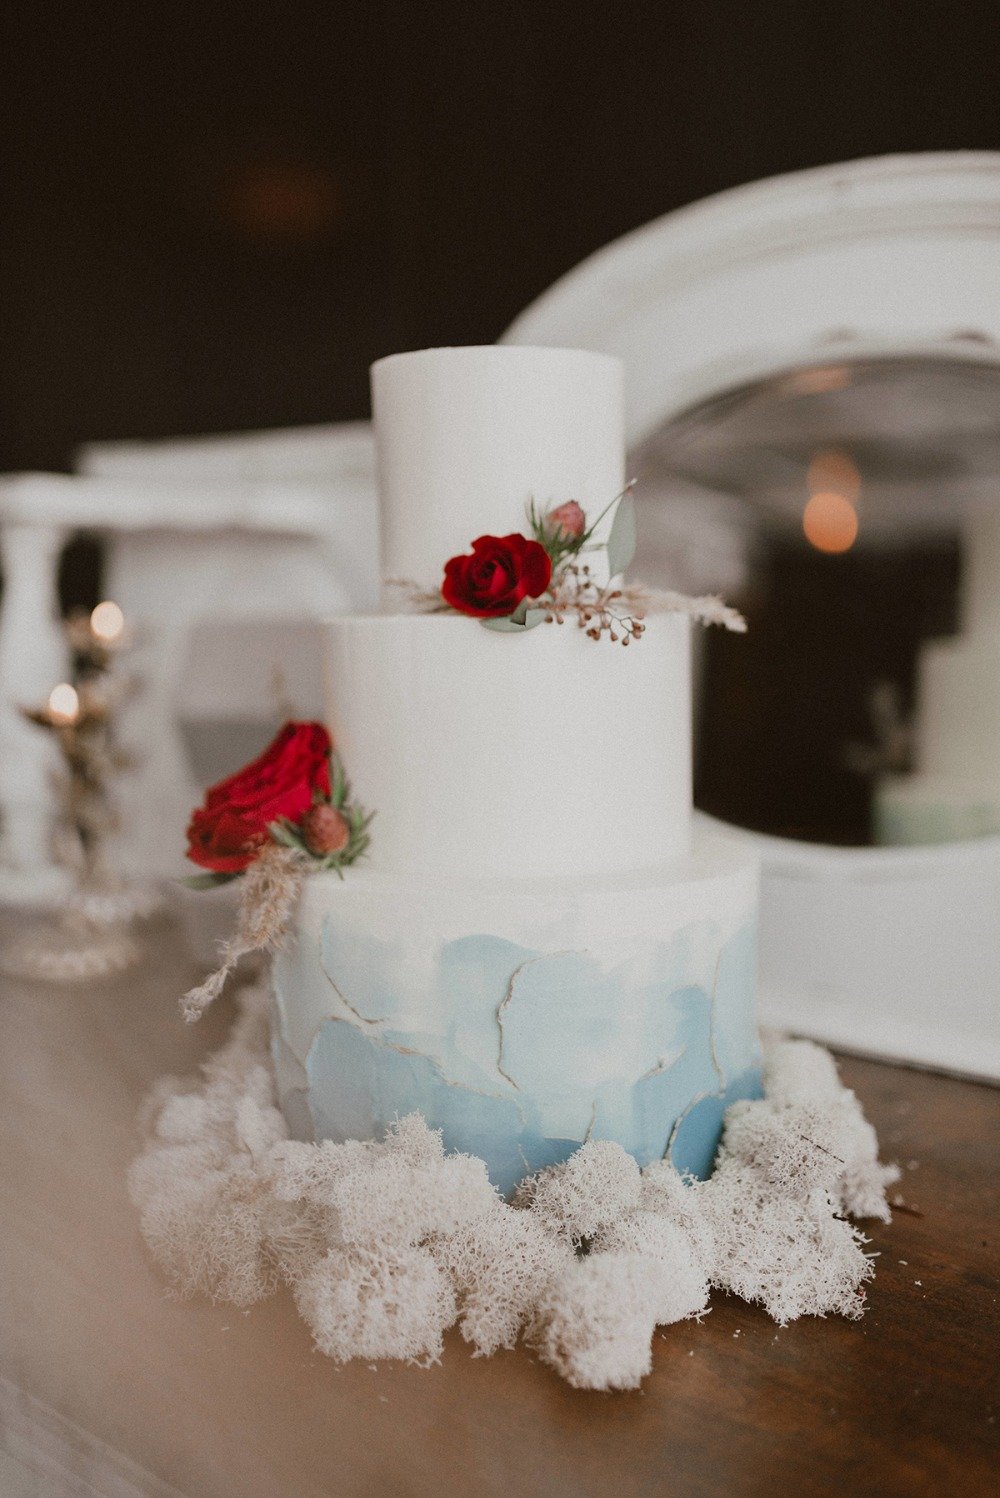 unique and elegant wedding cake in blue and white